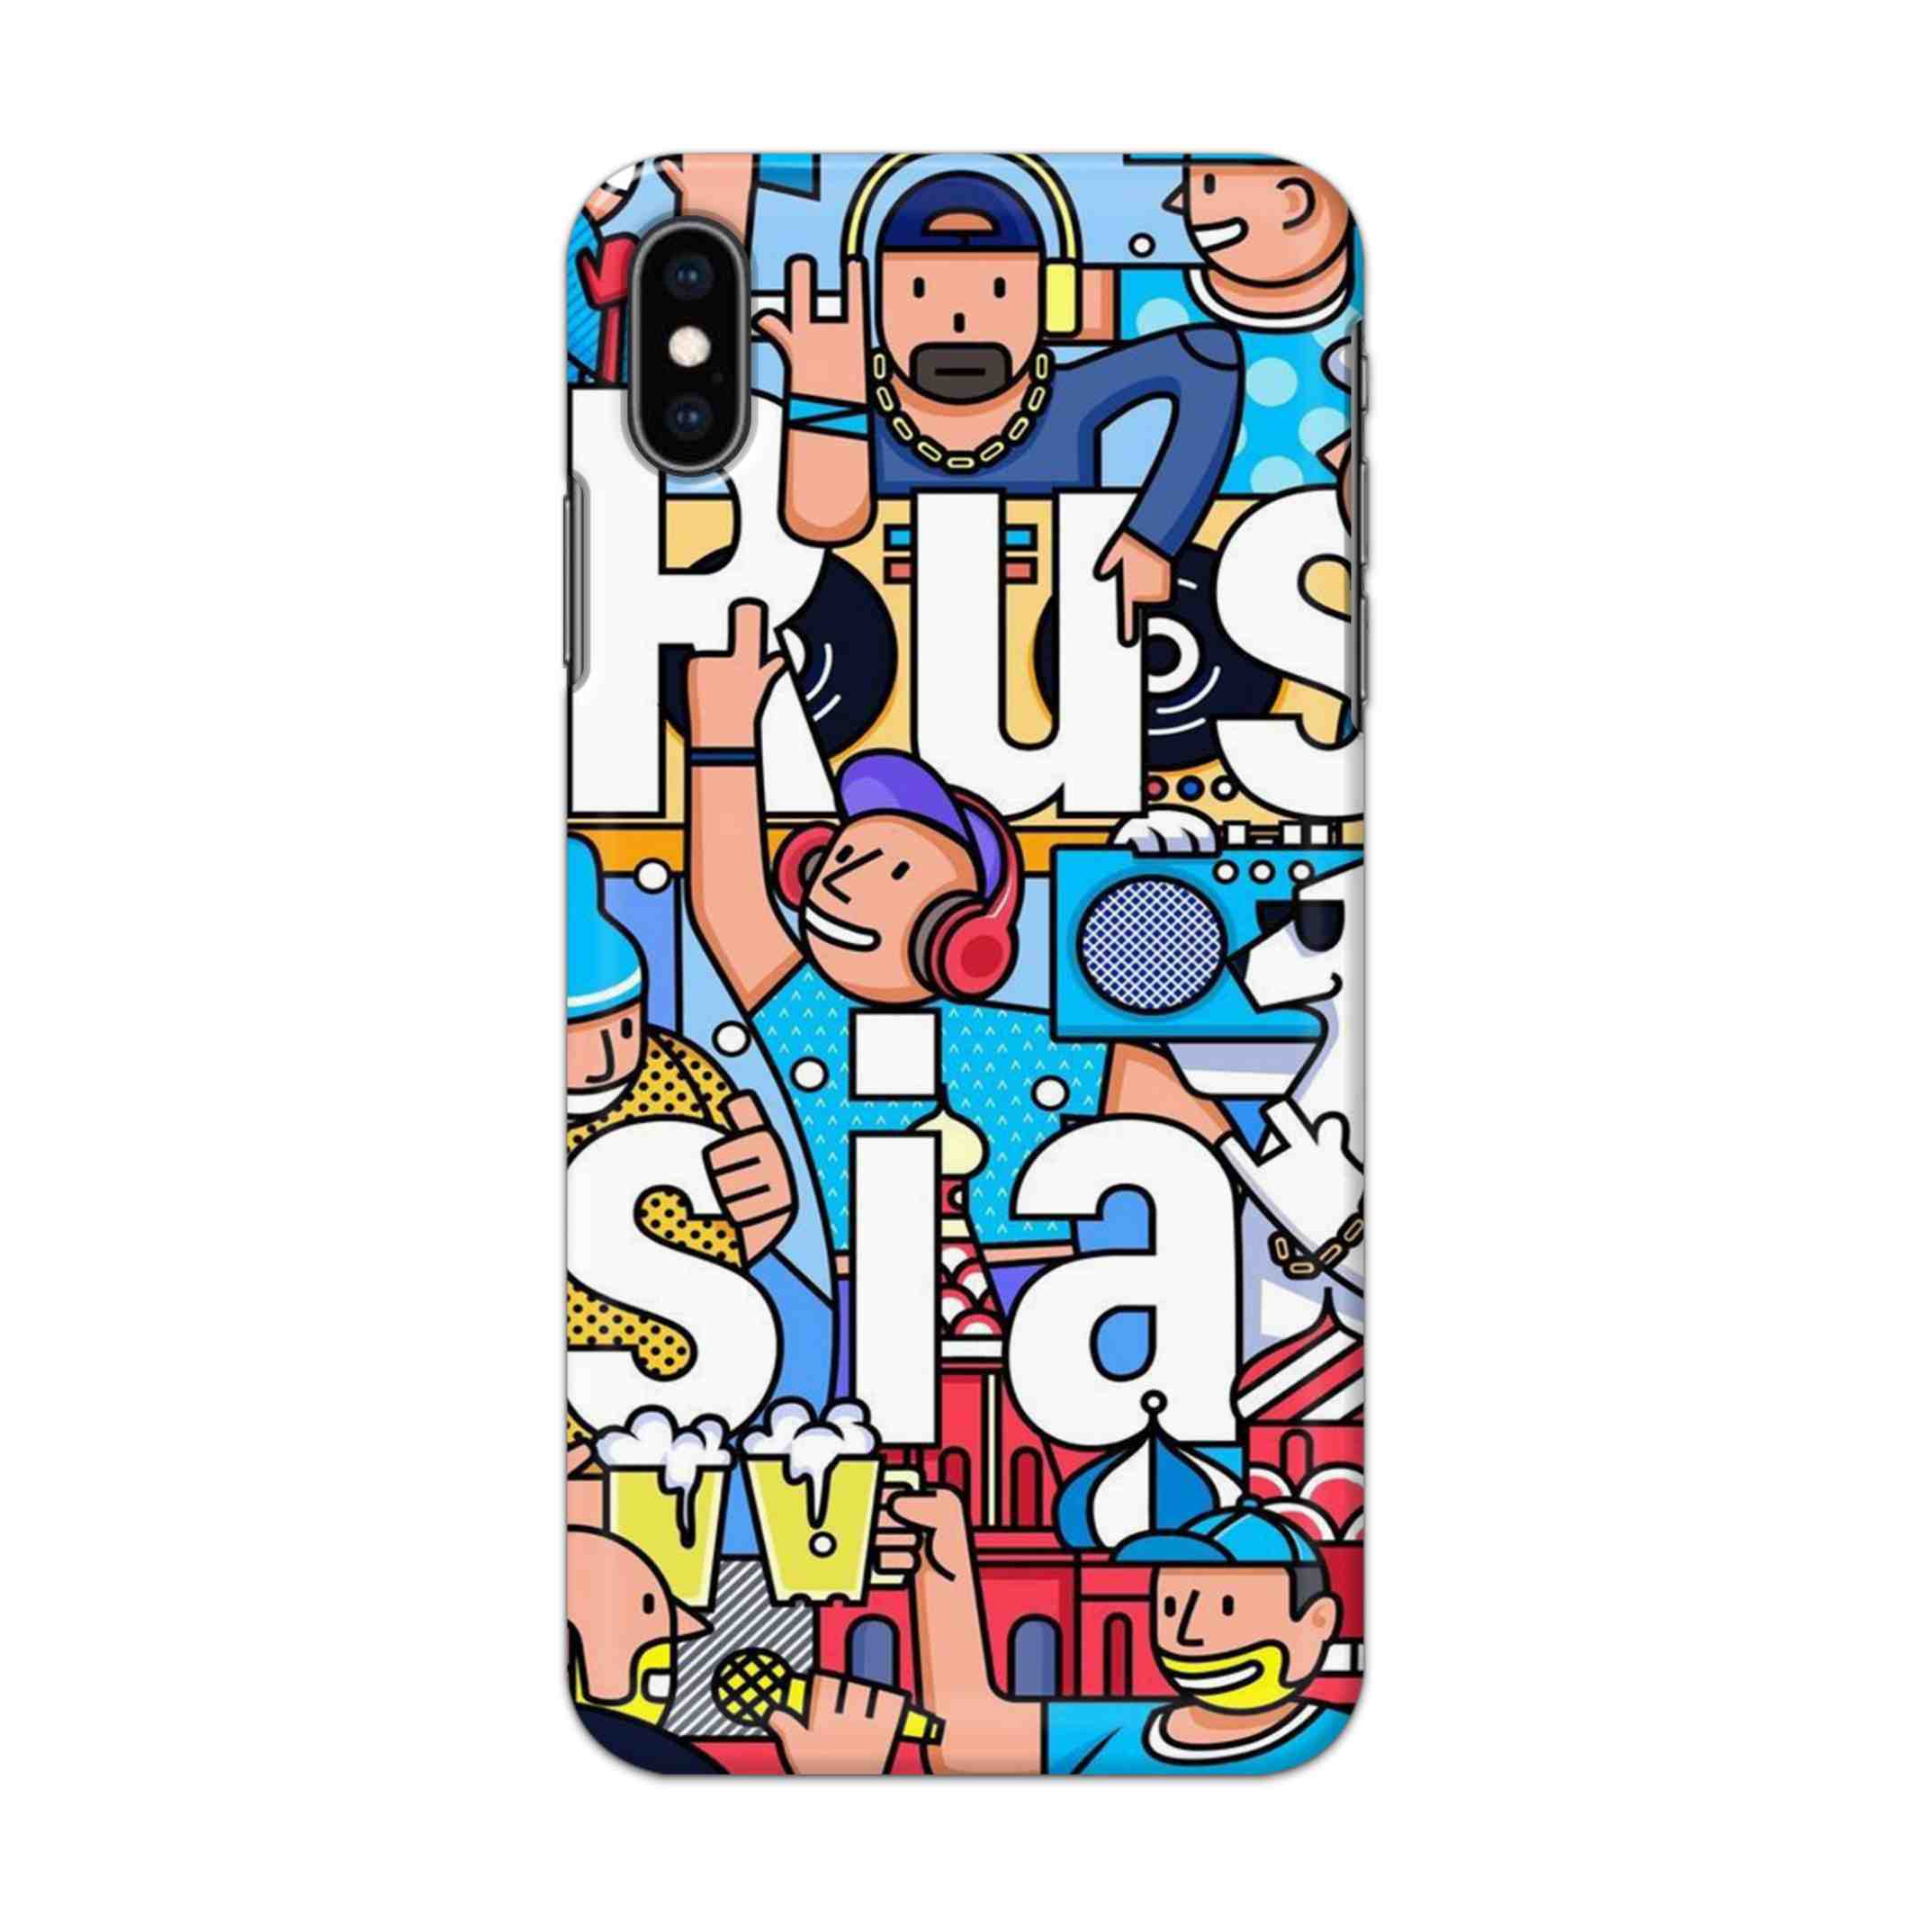 Buy Russia Hard Back Mobile Phone Case/Cover For iPhone XS MAX Online